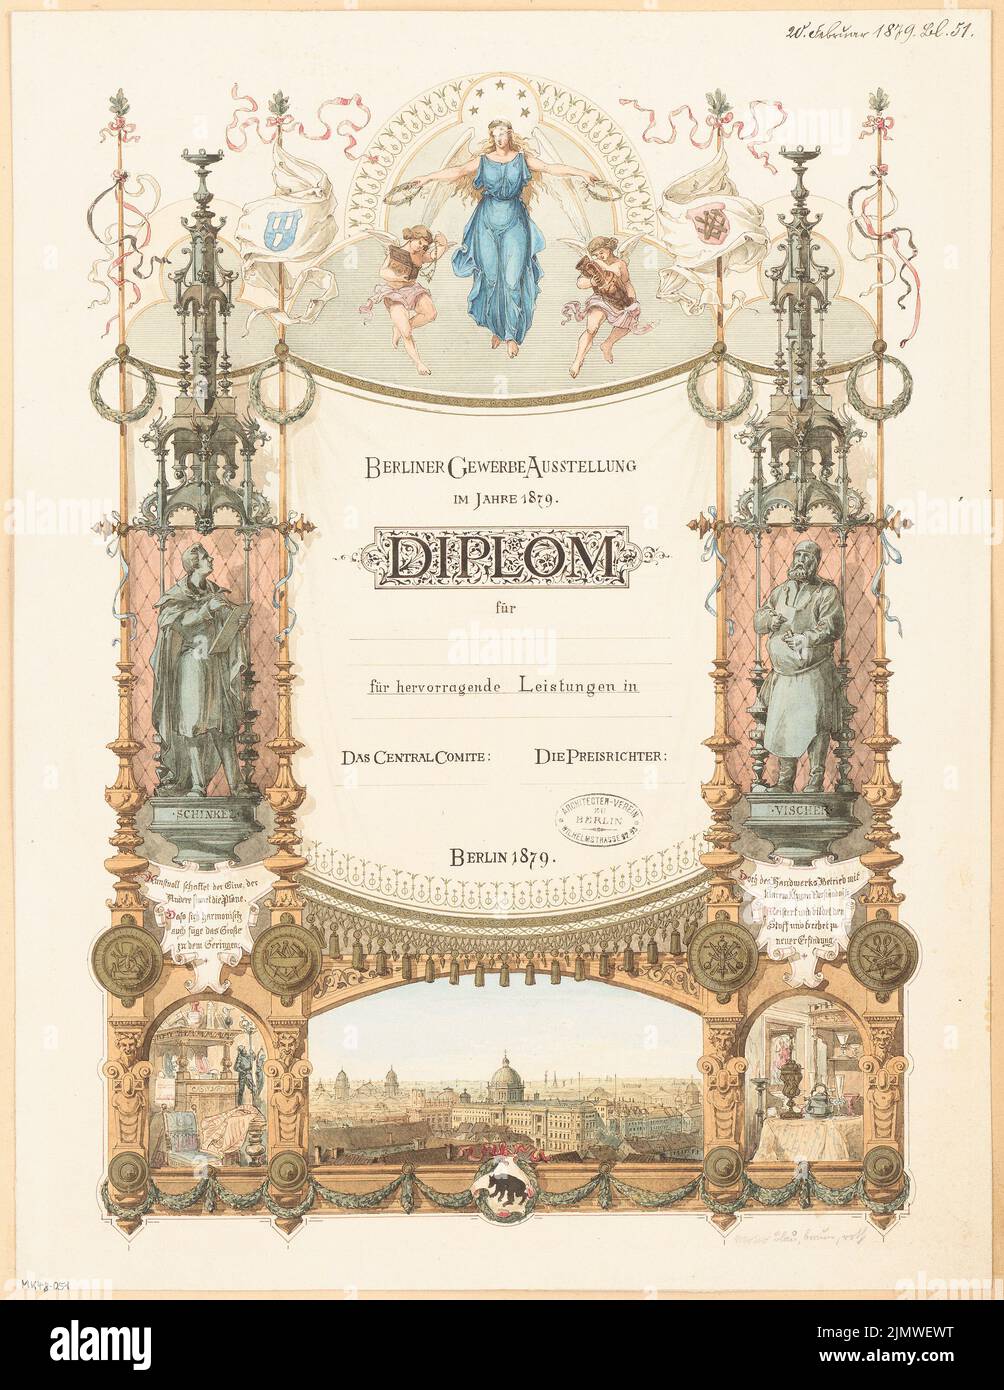 Unknown architect, diploma for the Berlin trade exhibition 1879. Monthly competition February 1879 (02.1879): View. Tusche watercolor on the box, 56.4 x 43.6 cm (including scan edges) N.N. : Diplom für die Berliner Gewerbeausstellung 1879. Monatskonkurrenz Februar 1879 Stock Photo